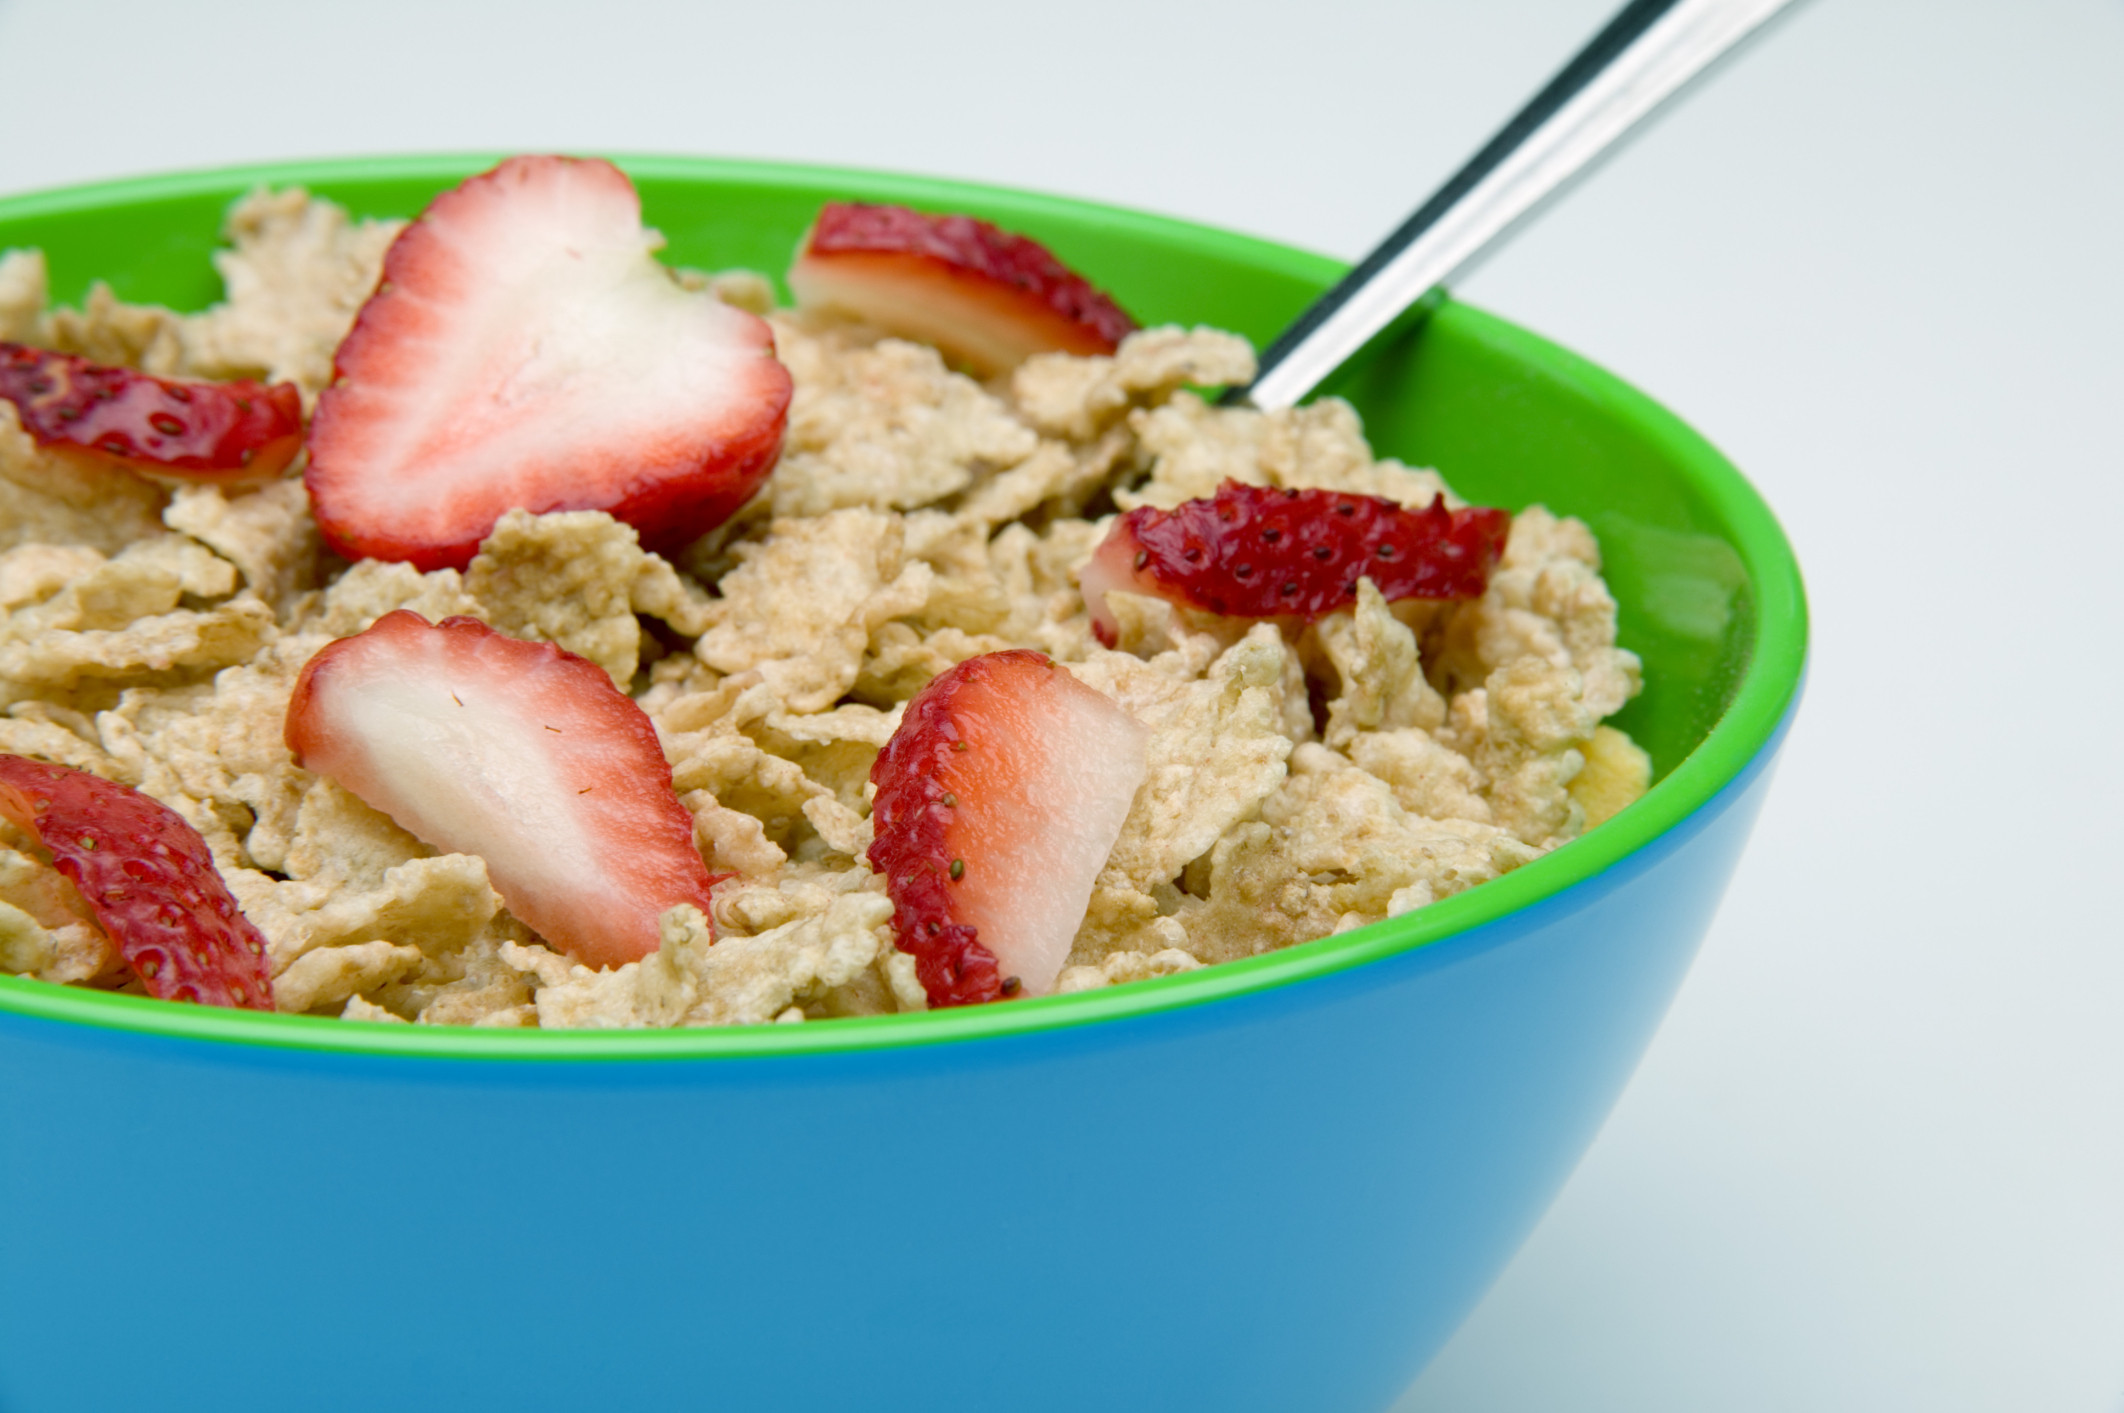 Healthy Breakfast For Kids Before School
 Encourage your child to eat a healthy breakfast